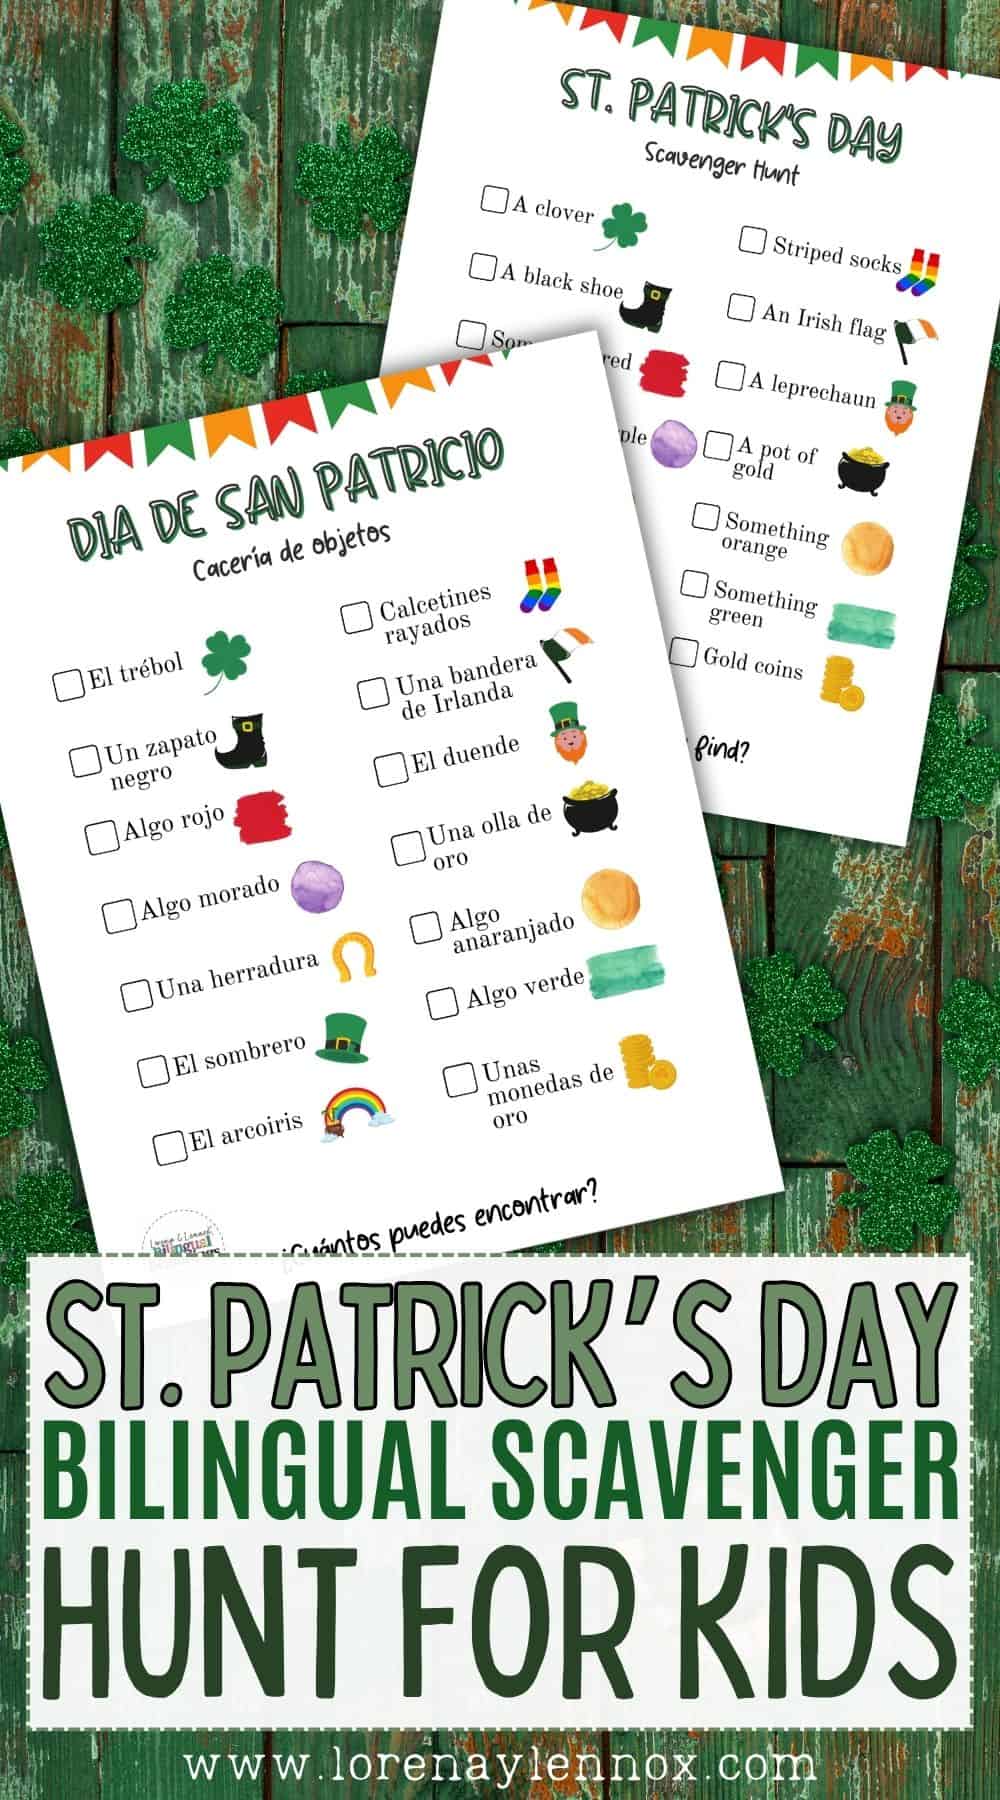 Make St. Patrick's Day unforgettable with our Spanish scavenger hunt! Explore fun and educational activities to engage children in language learning while hunting for holiday-themed treasures. Subscribe to access the free printable or purchase it on our TPT site. Let the adventure begin! #StPatricksDay #SpanishActivities #ScavengerHunt